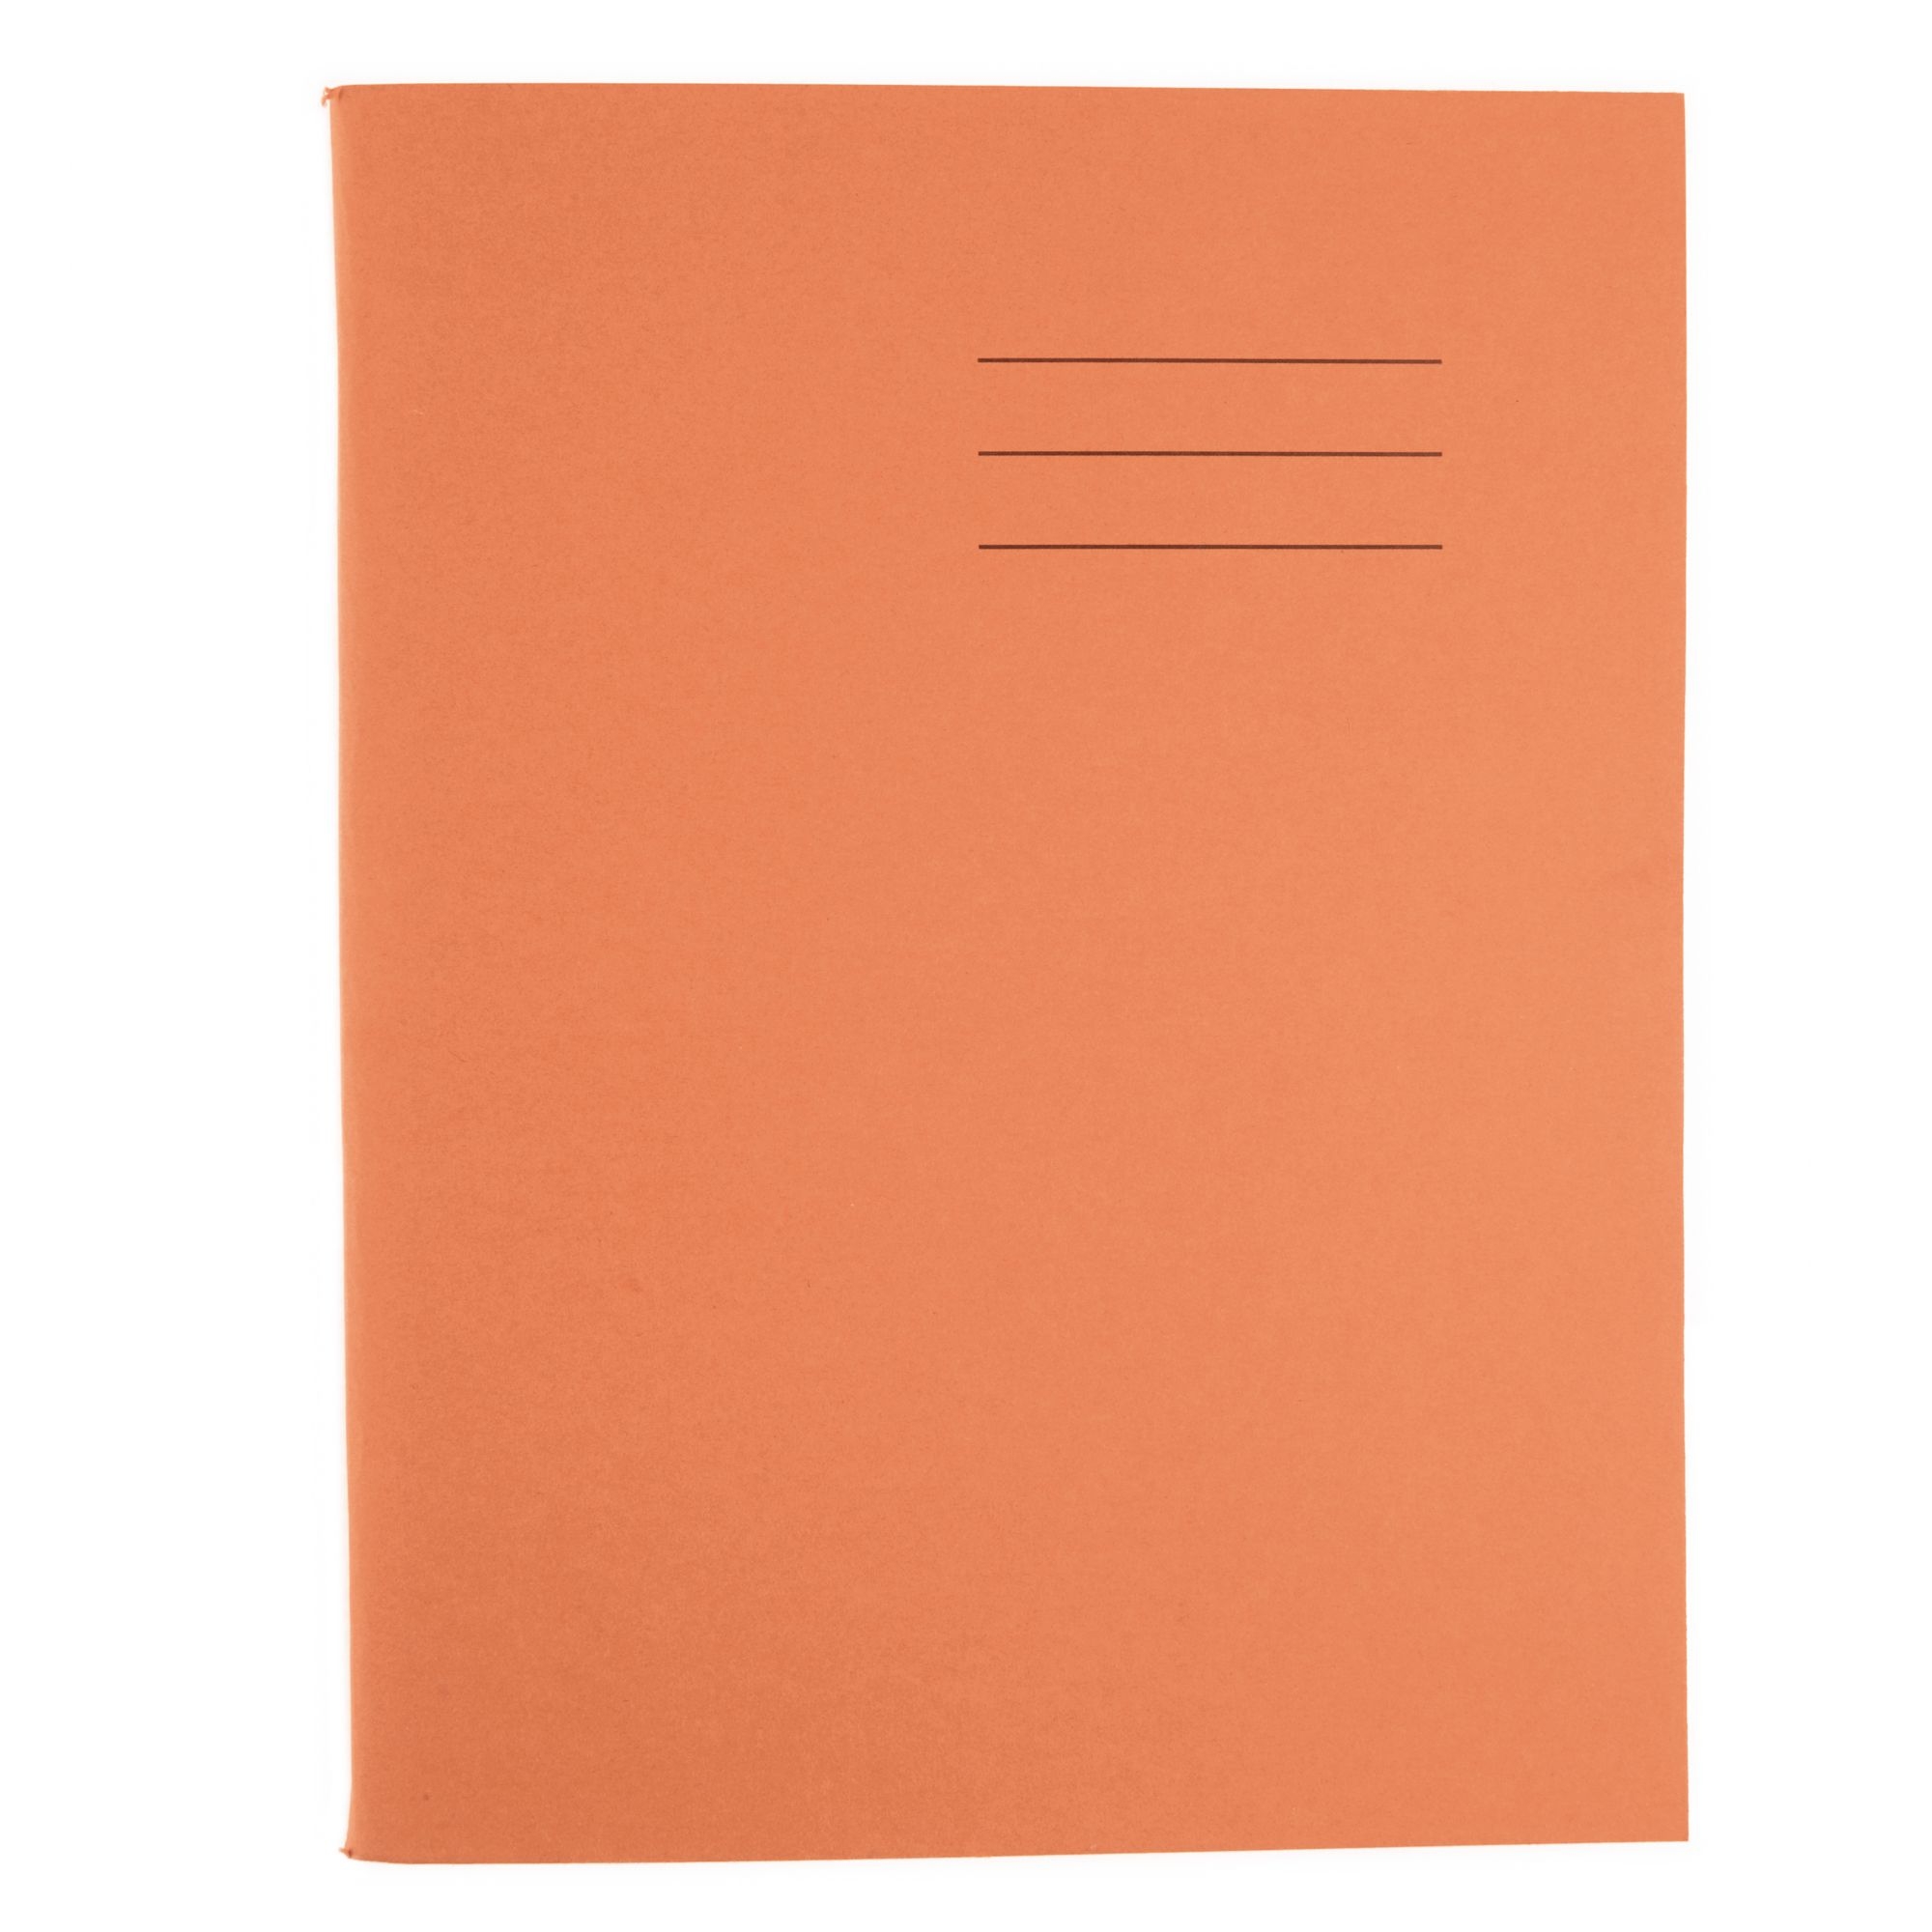 9x7 Exercise Book 48 Page, 5mm Squared, Orange - Pack of 100